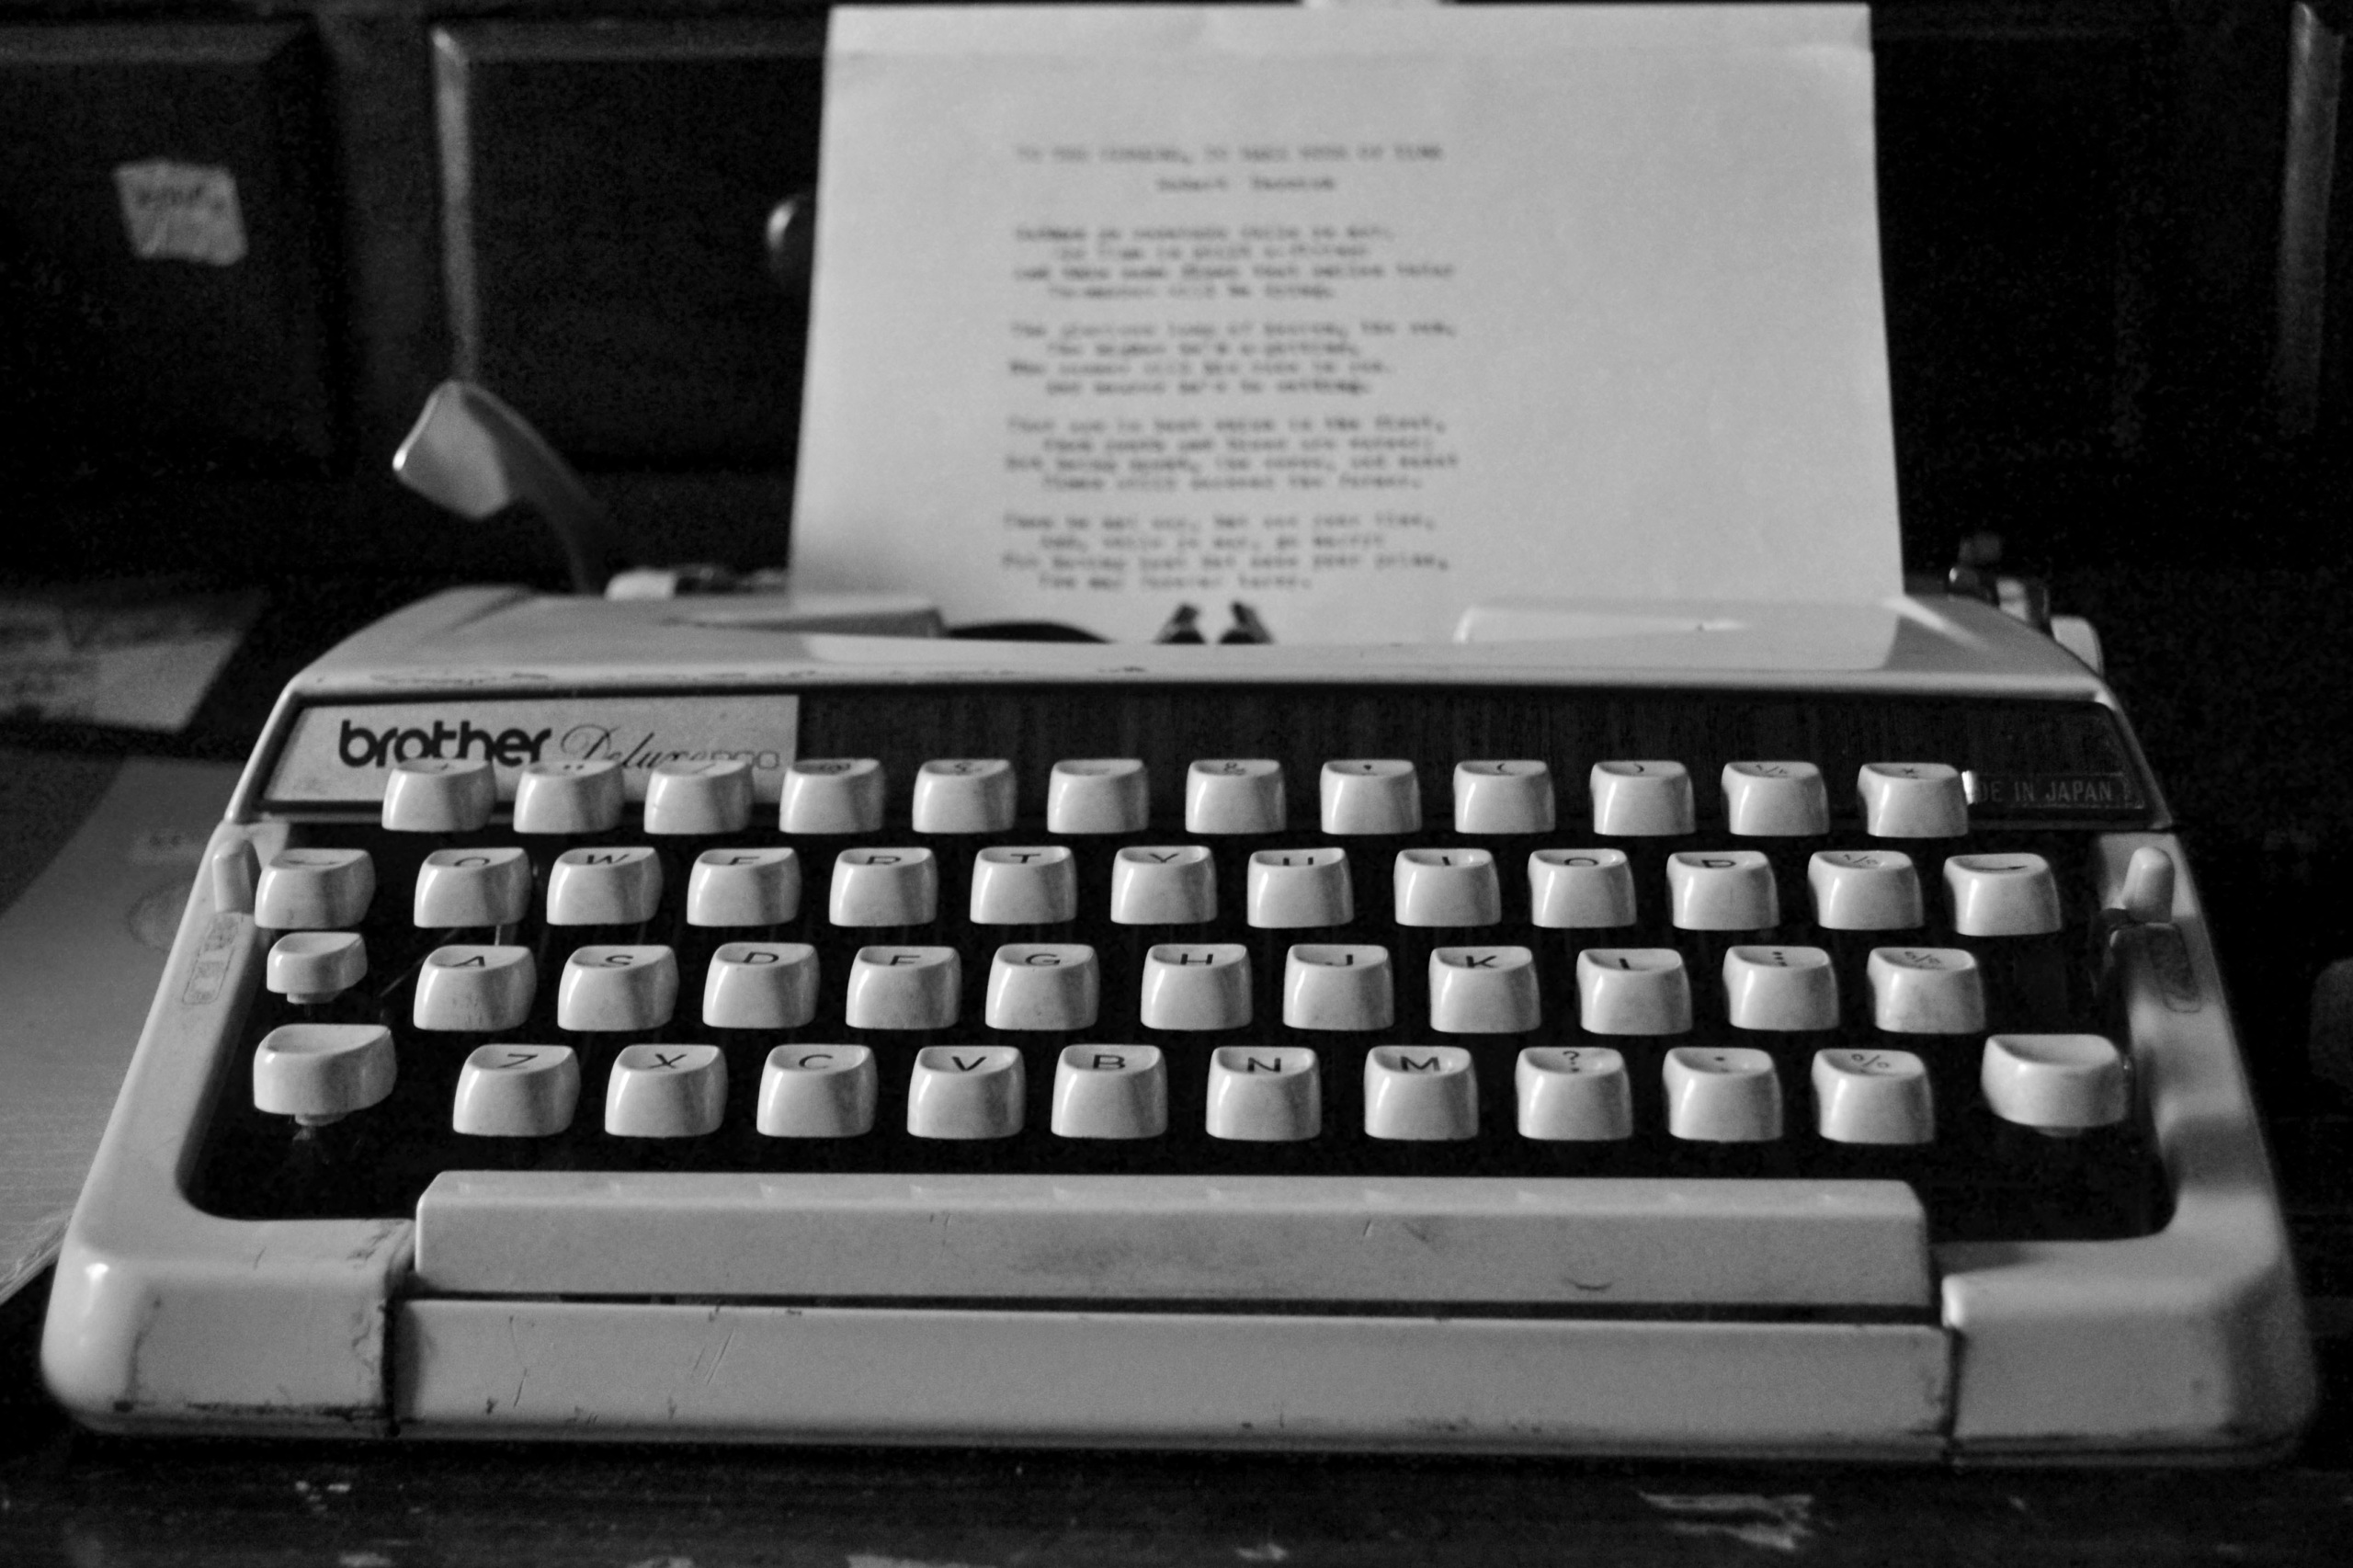 Old Brother typewriter with a blurred letter in it.